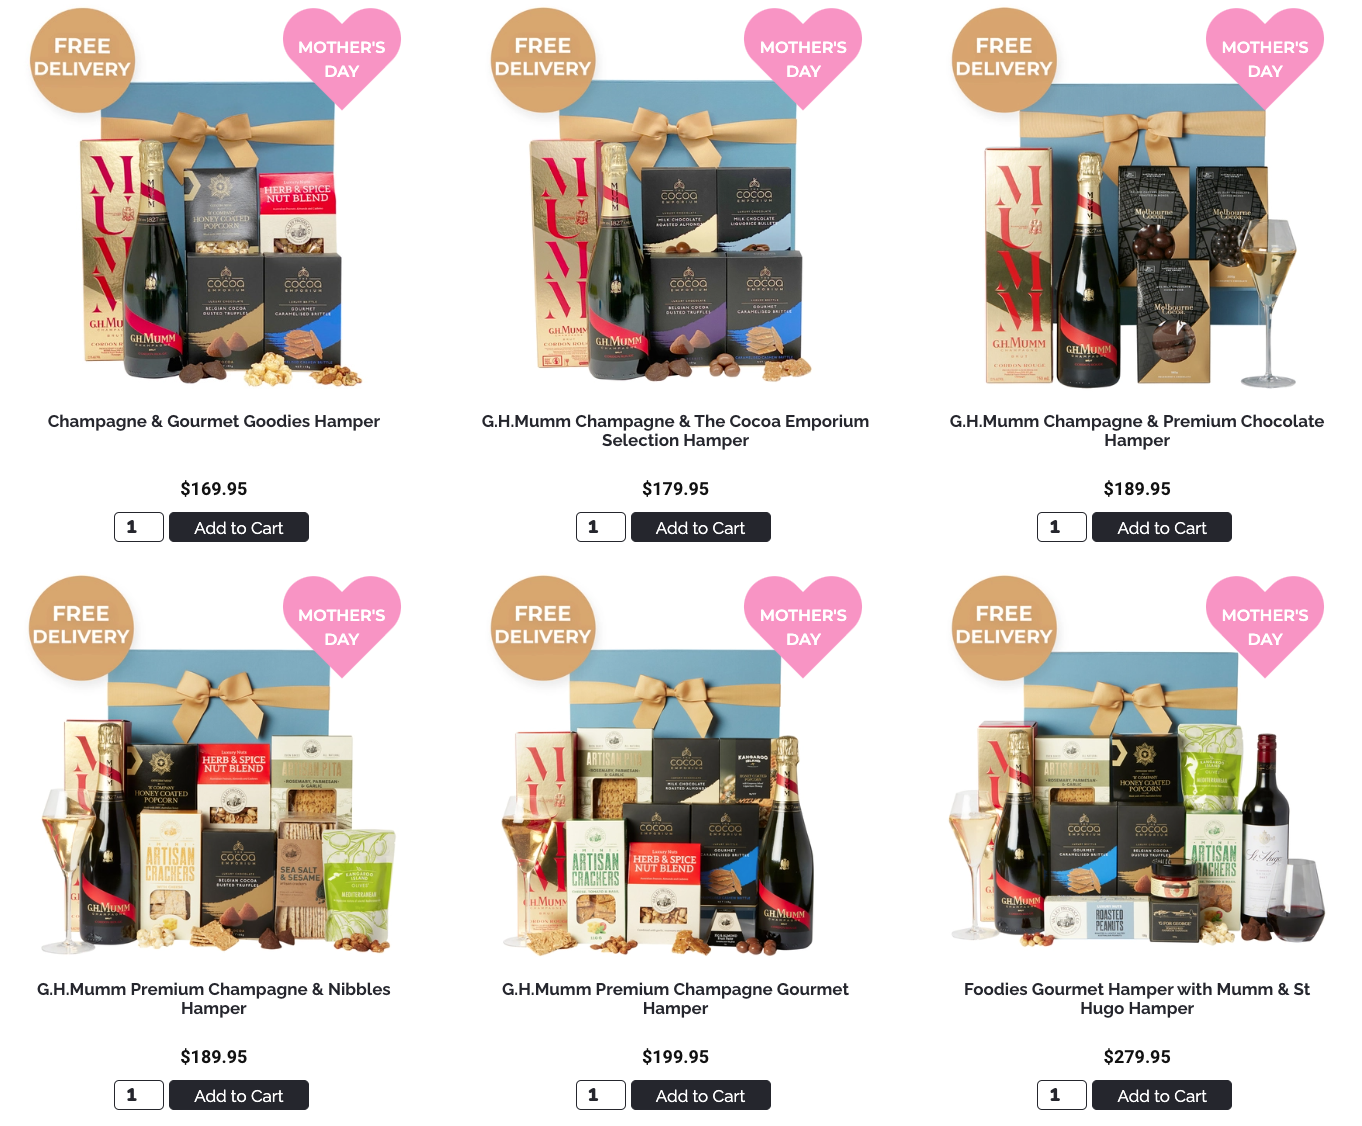 The Perfect Mother's Day Gift: Gourmet Hampers from The Gourmet Pantry